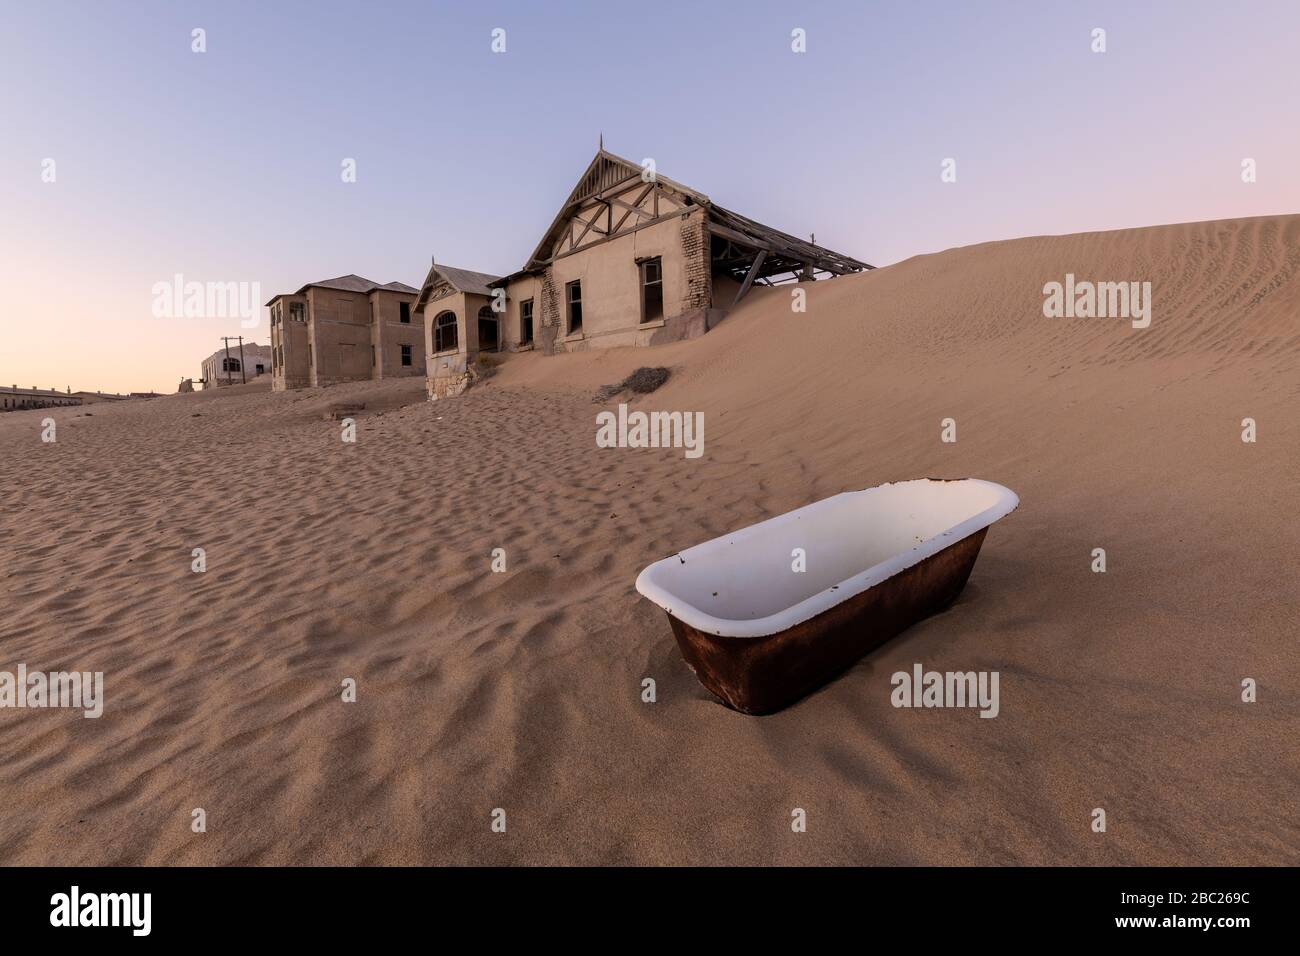 A photograph outside with an abandoned house on the horizon and a white bathtub lying in the rippled desert sand in the foreground, taken in the ghost Stock Photo